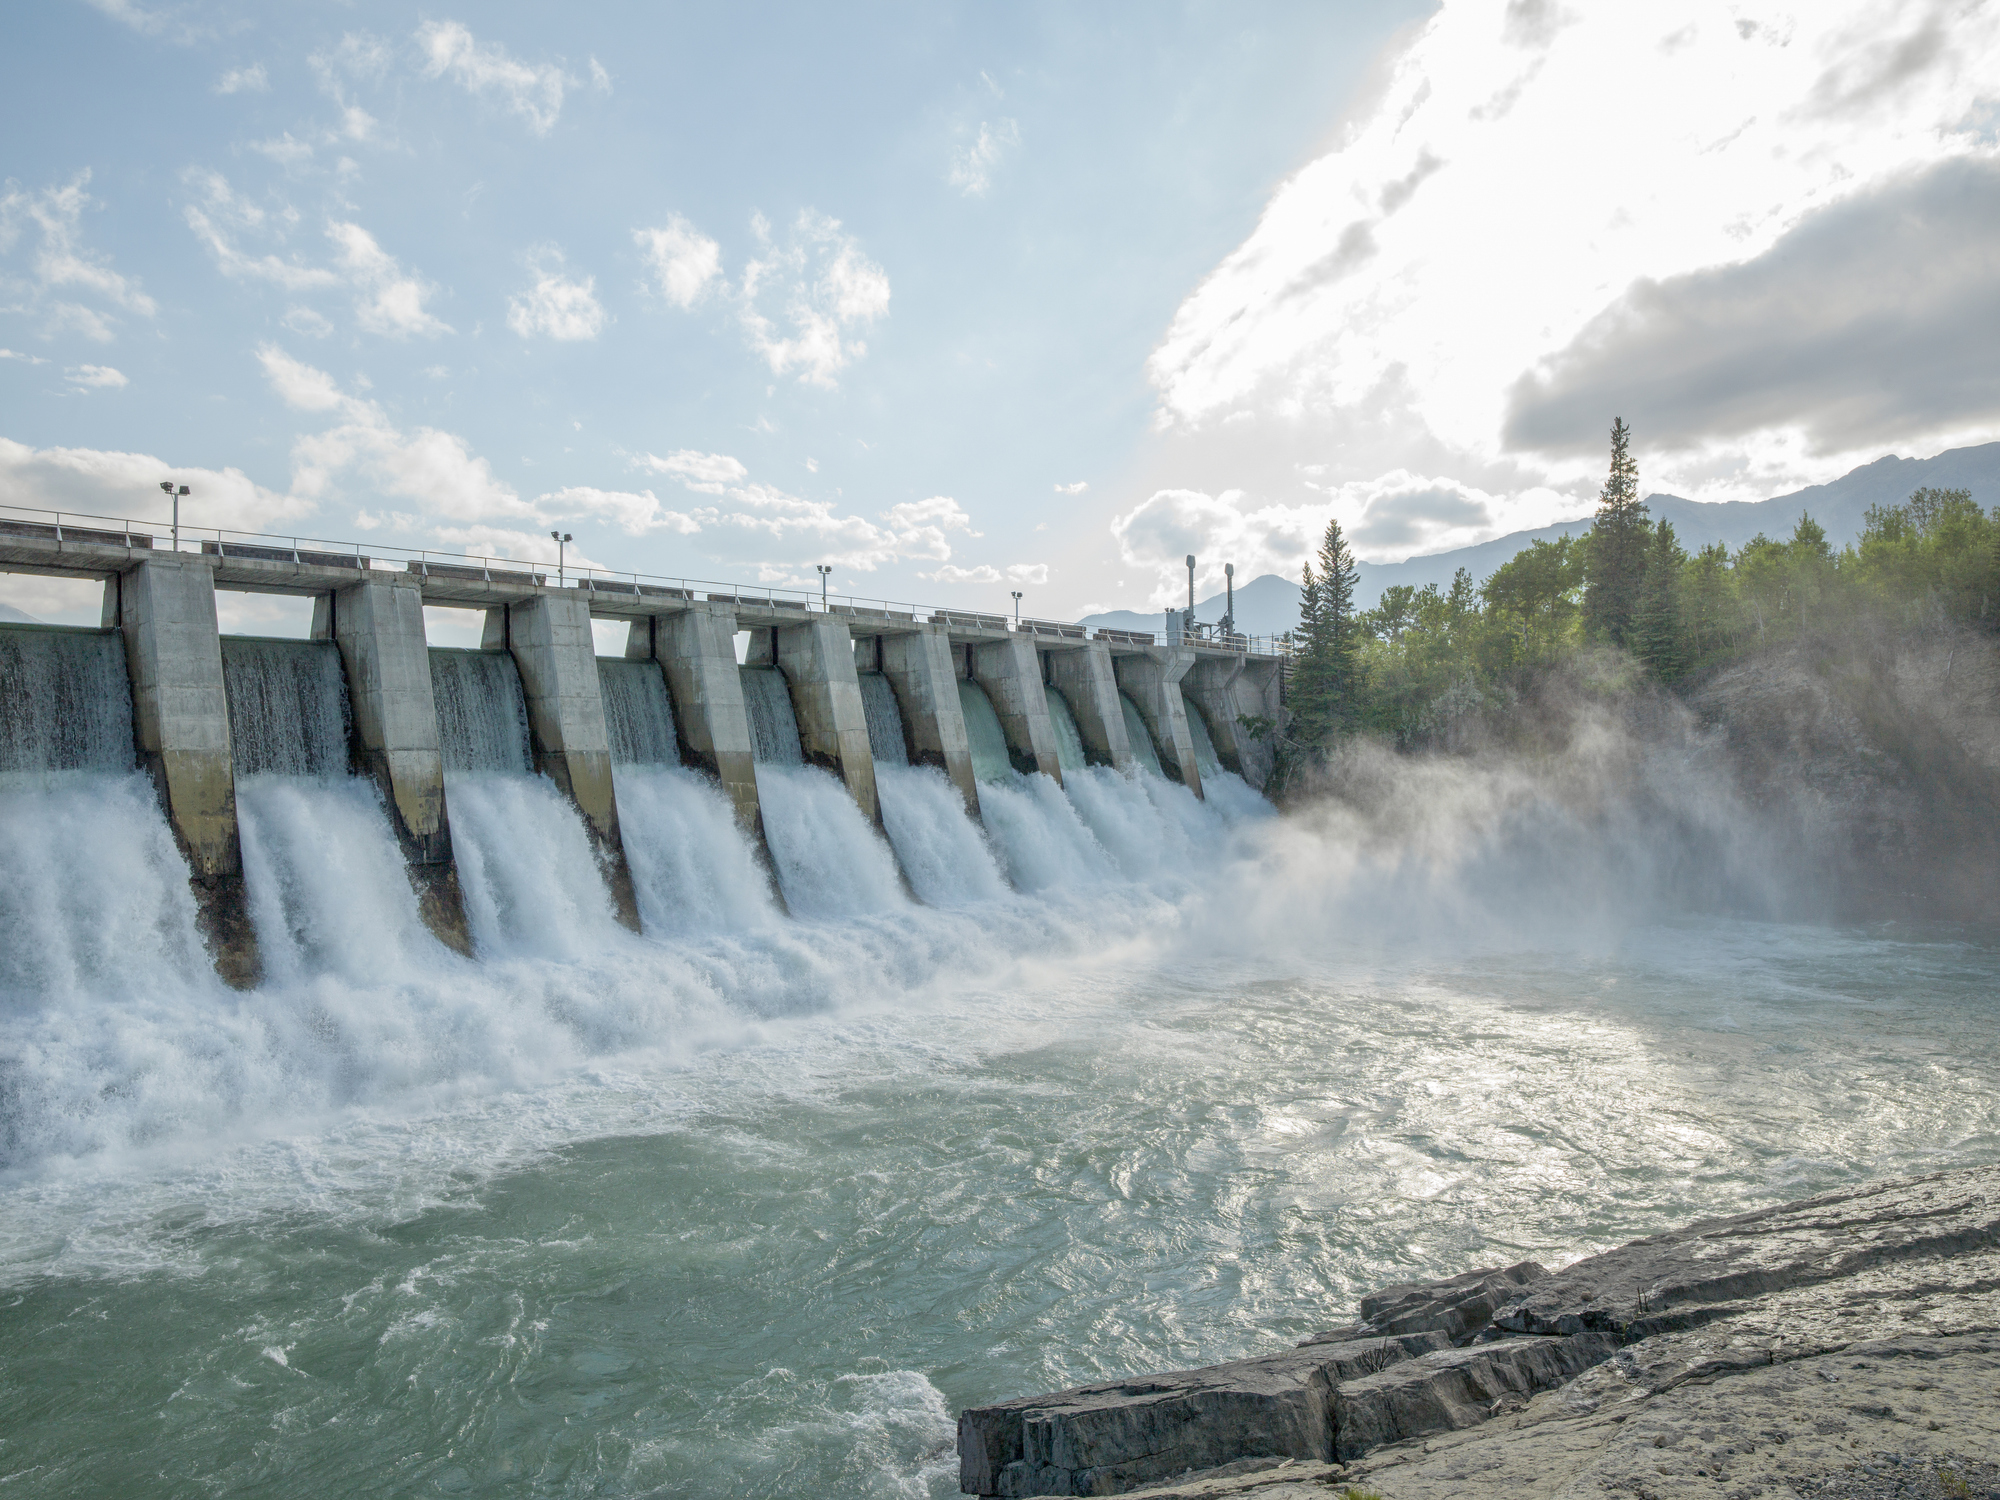 Fast running water at a hydropower plant in Canada.